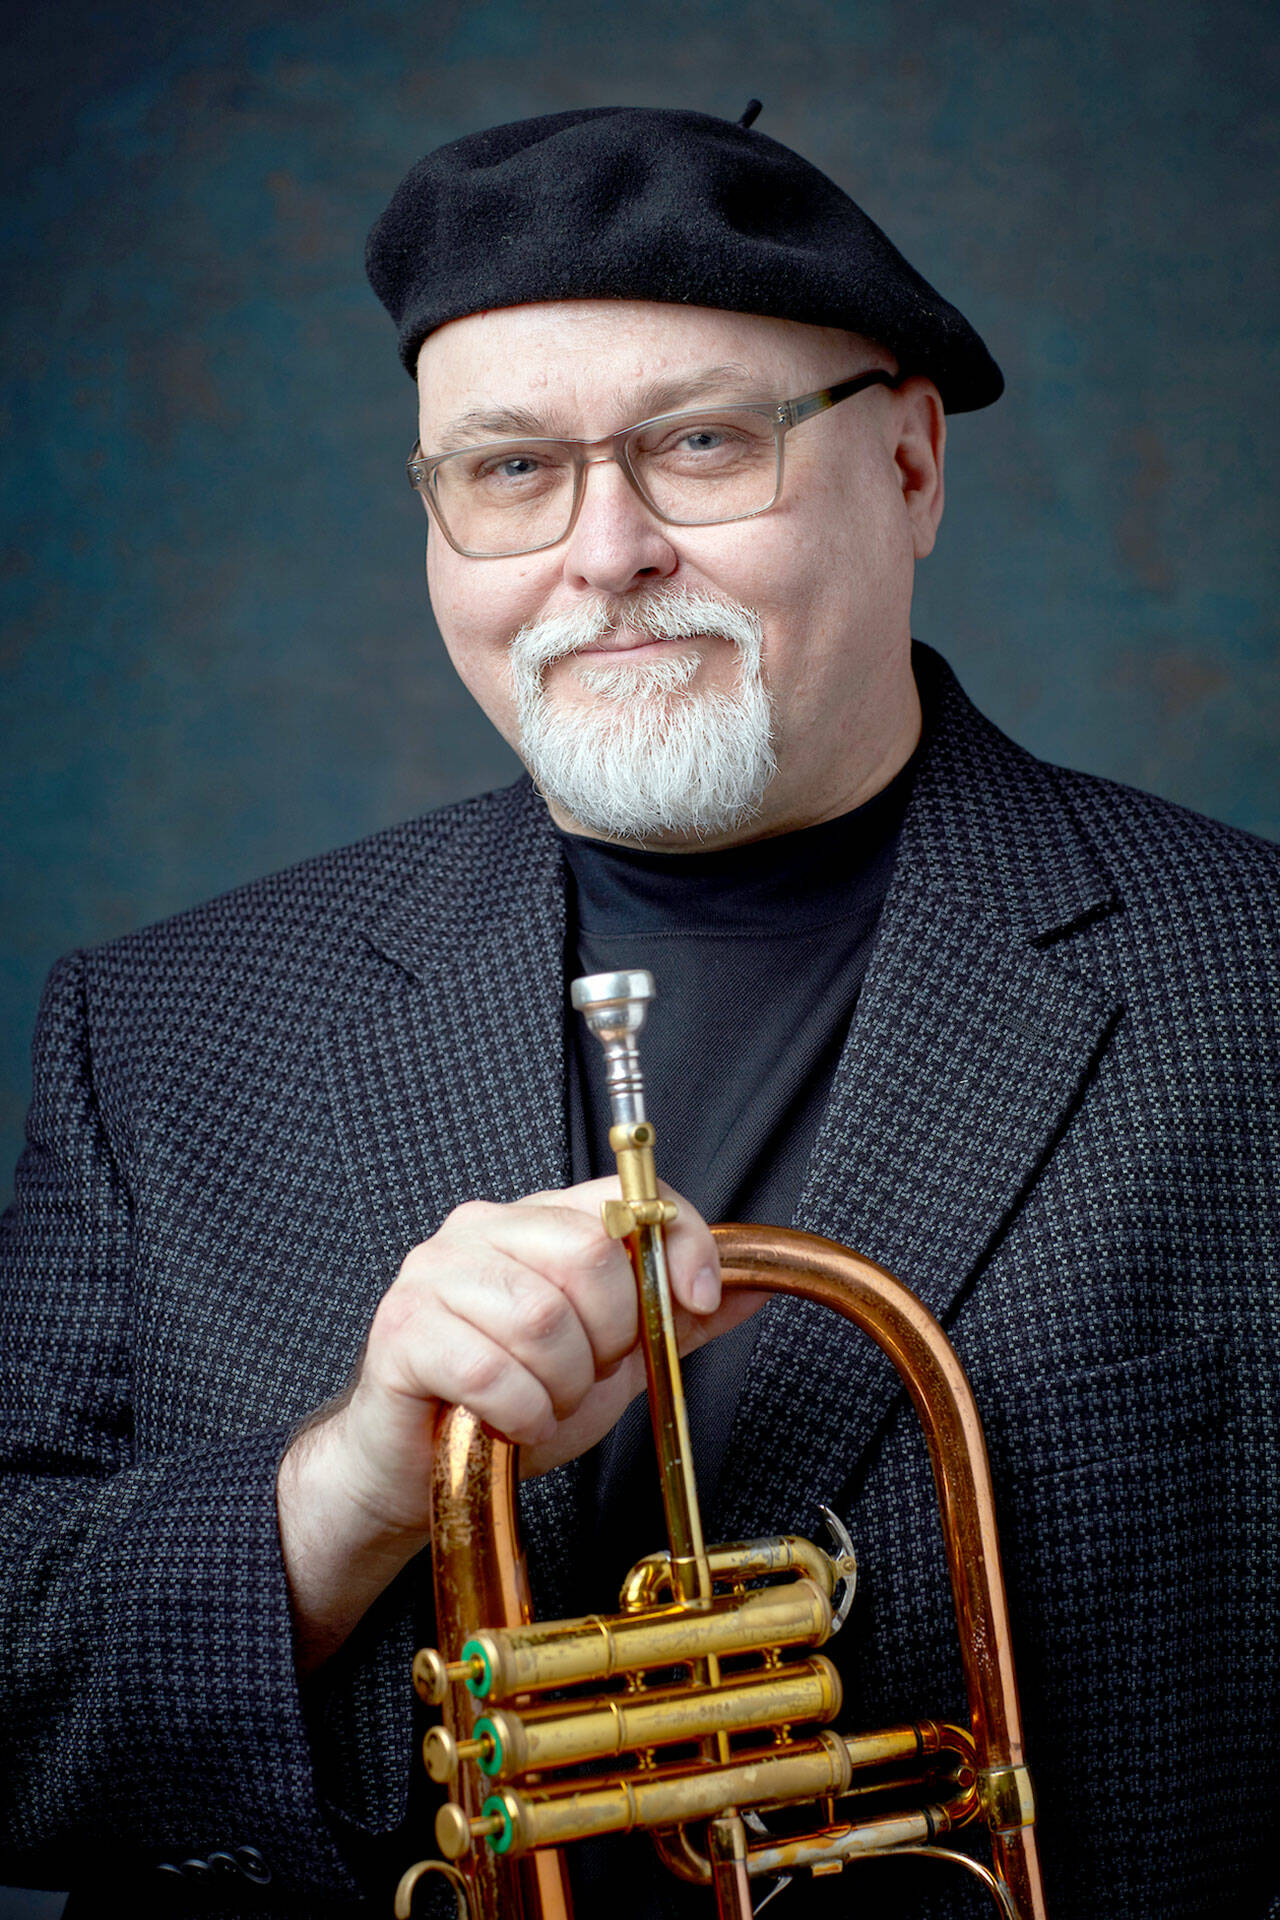 Flugelhornist Dmitri Matheny will join the David P. Jones Trio for a jazz concert at Peninsula College this Saturday evening. (Photo by Steve Korn)